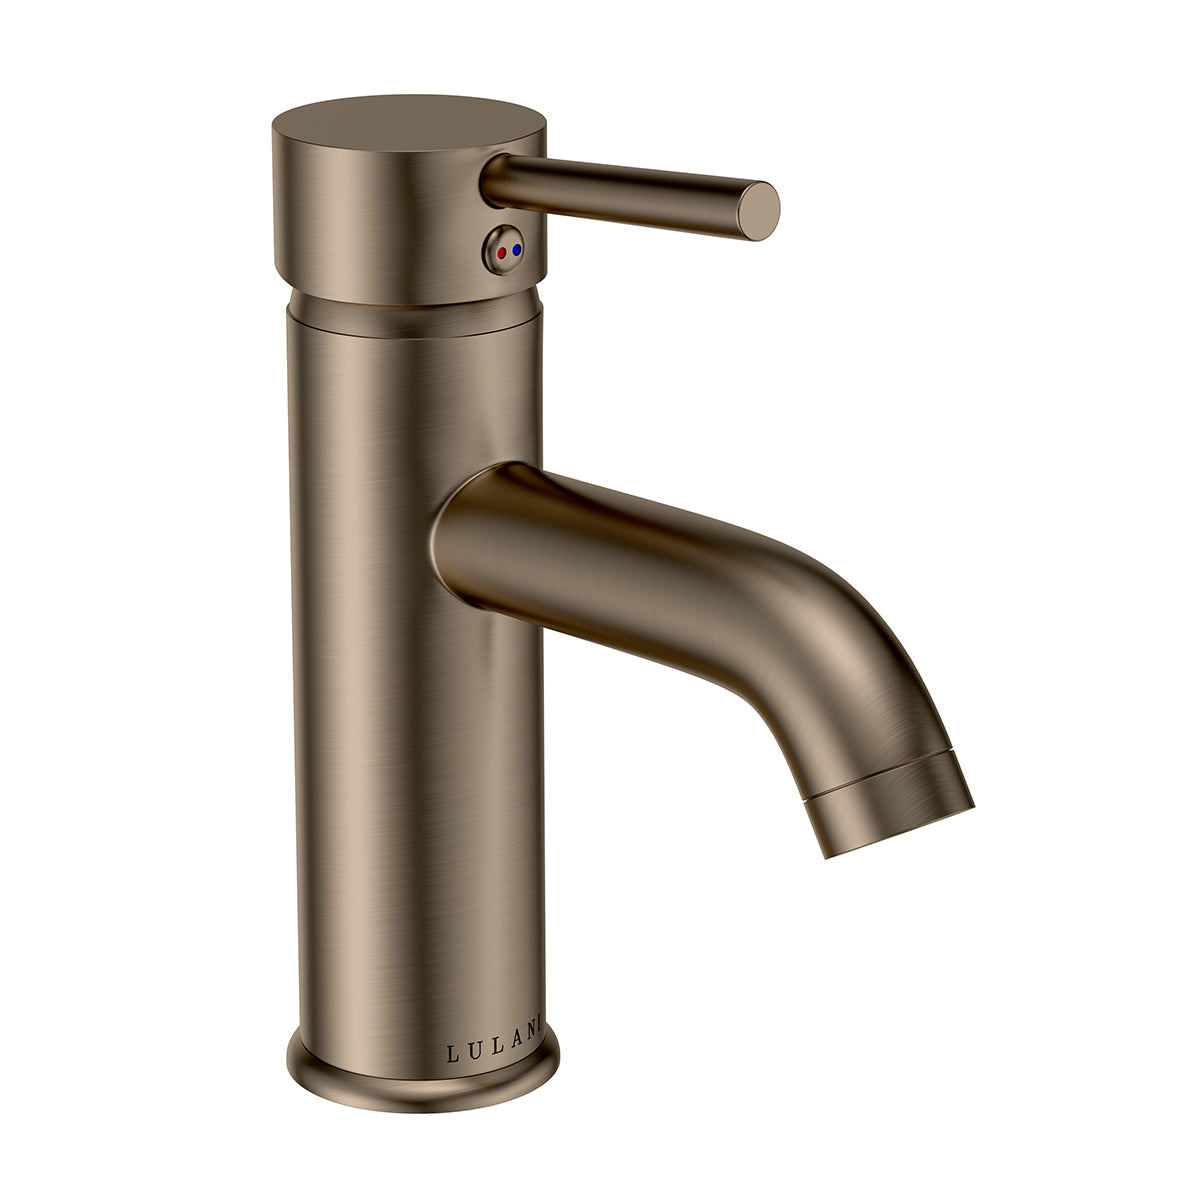 Open Box - St. Lucia, Commercial Grade Single Handle Bathroom Faucet with Drain Assembly